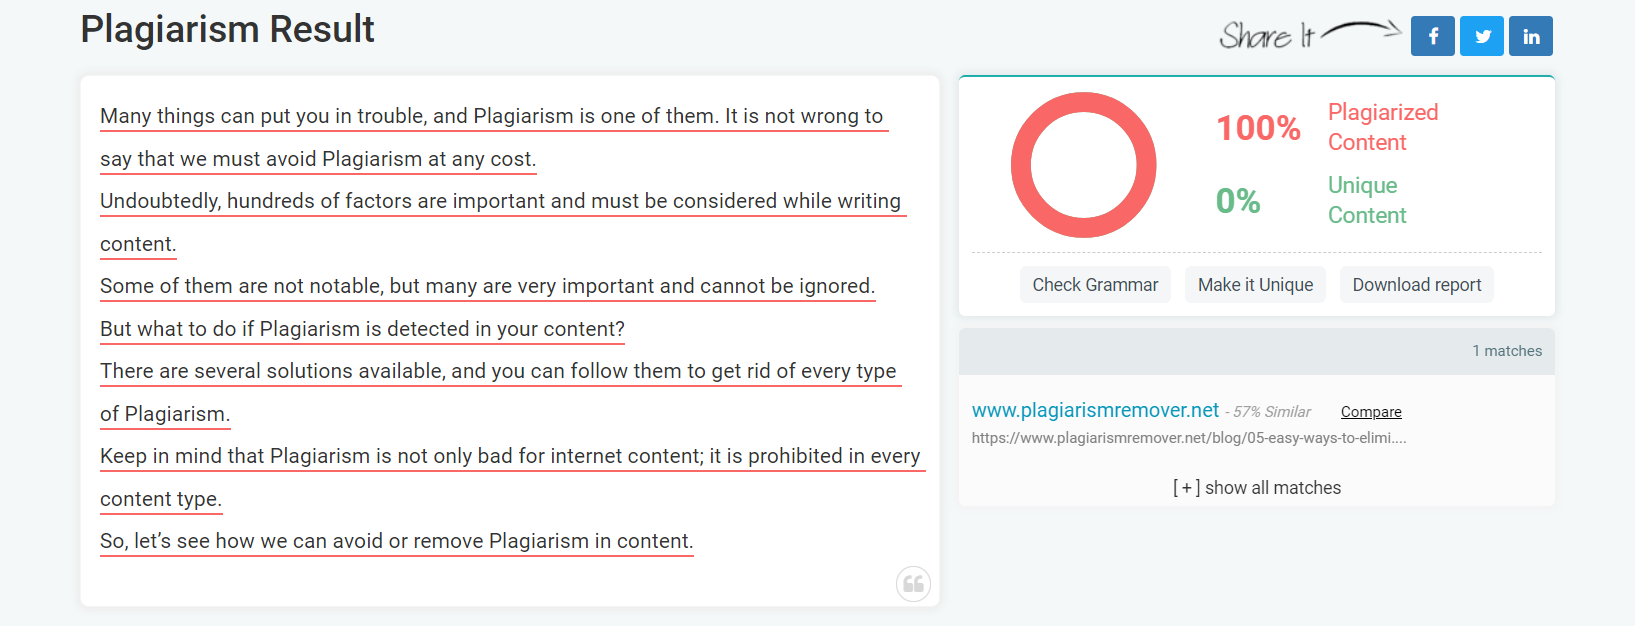 plagiarism checker by plagiarismremover.net